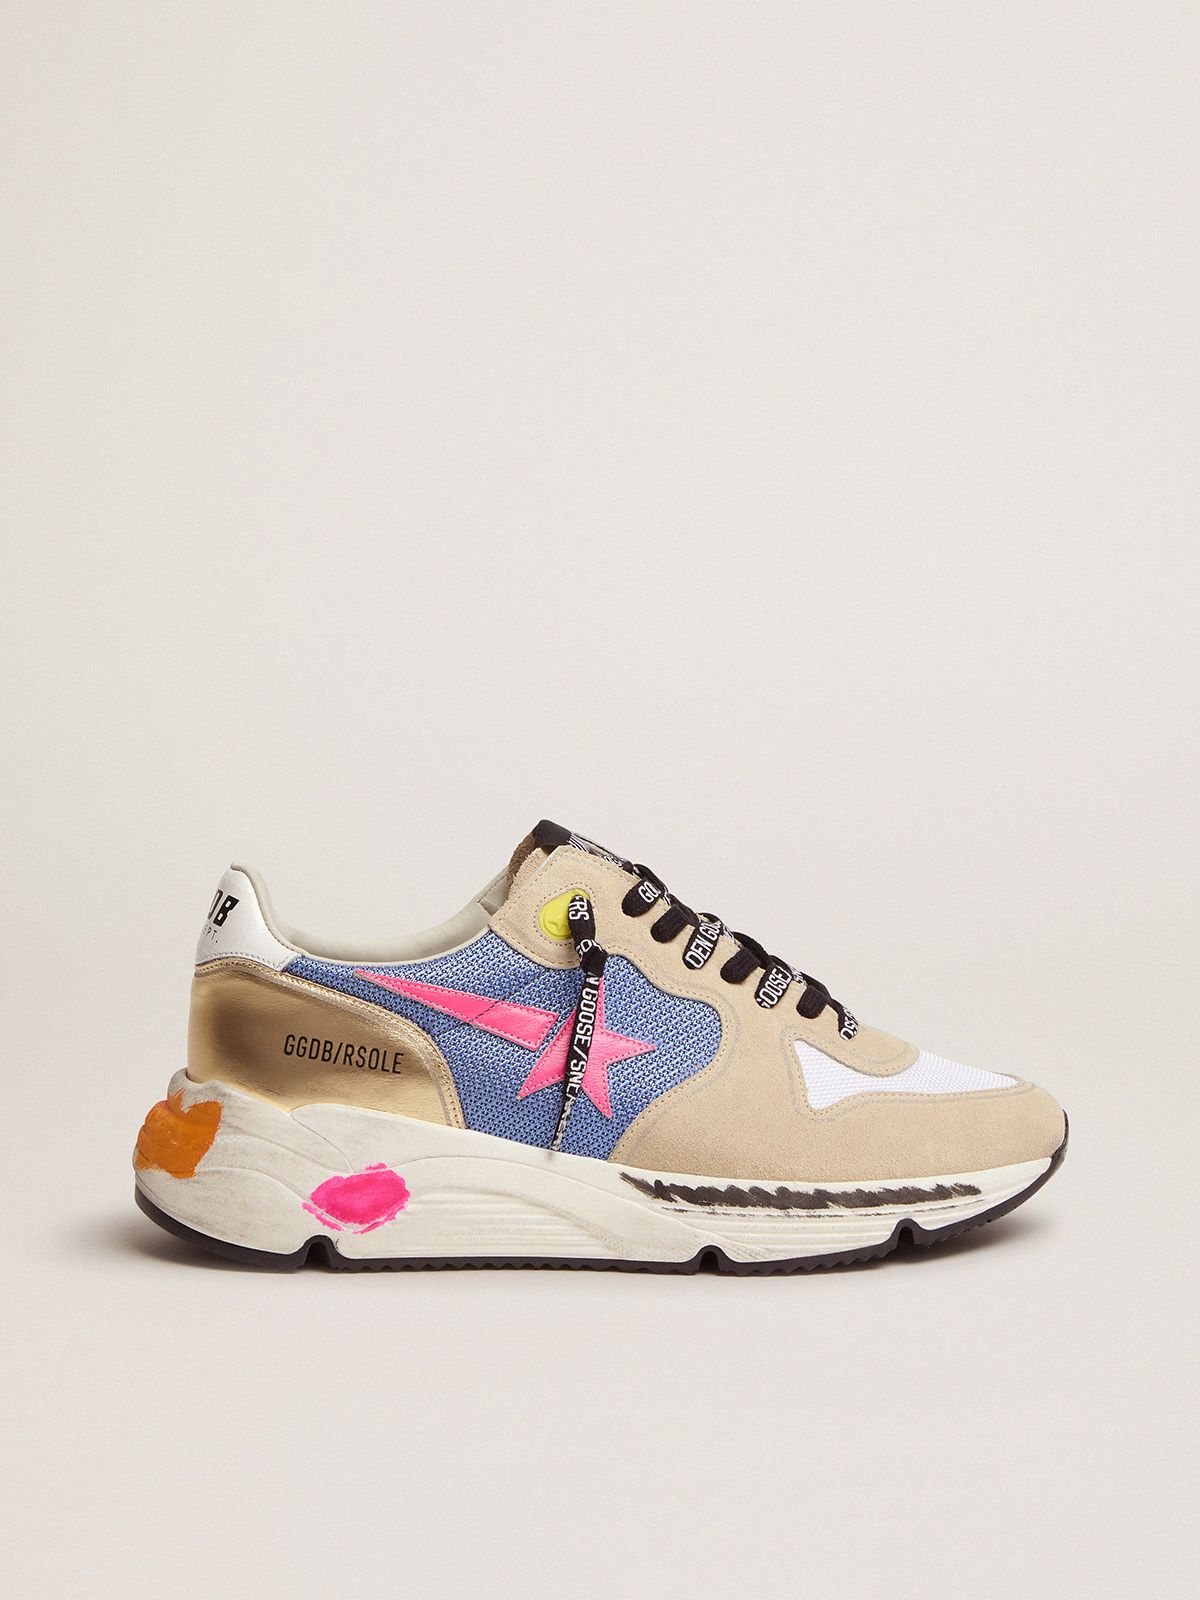 golden goose sneakers Running suede detail in with gold Sole